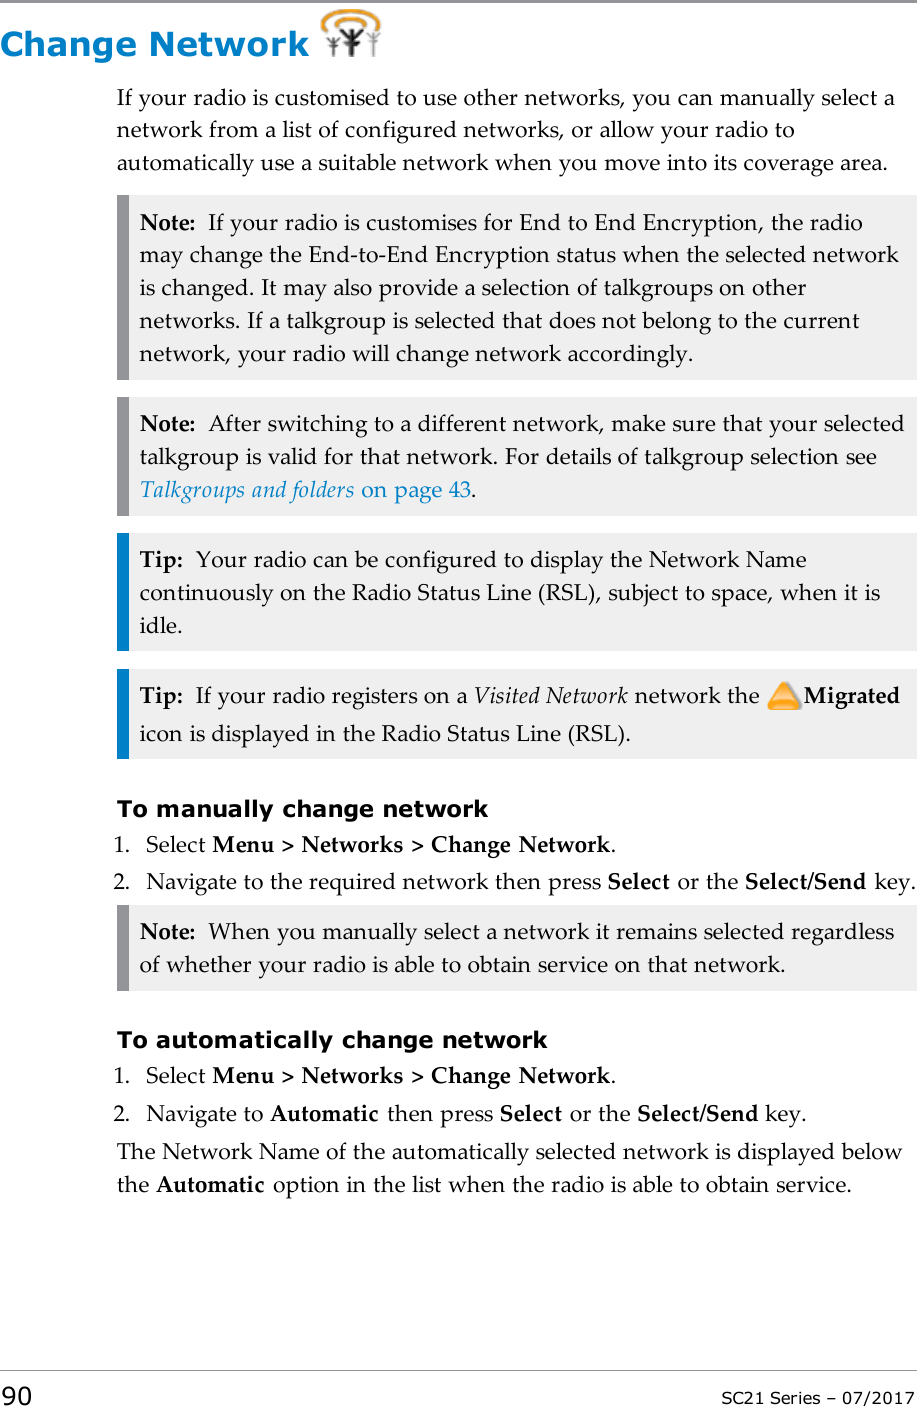 Change NetworkIf your radio is customised to use other networks, you can manually select anetwork from a list of configured networks, or allow your radio toautomatically use a suitable network when you move into its coverage area.Note: If your radio is customises for End to End Encryption, the radiomay change the End-to-End Encryption status when the selected networkis changed. It may also provide a selection of talkgroups on othernetworks. If a talkgroup is selected that does not belong to the currentnetwork, your radio will change network accordingly.Note: After switching to a different network, make sure that your selectedtalkgroup is valid for that network. For details of talkgroup selection seeTalkgroups and folders on page43.Tip: Your radio can be configured to display the Network Namecontinuously on the Radio Status Line (RSL), subject to space, when it isidle.Tip: If your radio registers on a Visited Network network the Migratedicon is displayed in the Radio Status Line (RSL).To manually change network1. Select Menu &gt; Networks &gt; Change Network.2. Navigate to the required network then press Select or the Select/Send key.Note: When you manually select a network it remains selected regardlessof whether your radio is able to obtain service on that network.To automatically change network1. Select Menu &gt; Networks &gt; Change Network.2. Navigate to Automatic then press Select or the Select/Send key.The Network Name of the automatically selected network is displayed belowthe Automatic option in the list when the radio is able to obtain service.90 SC21 Series – 07/2017